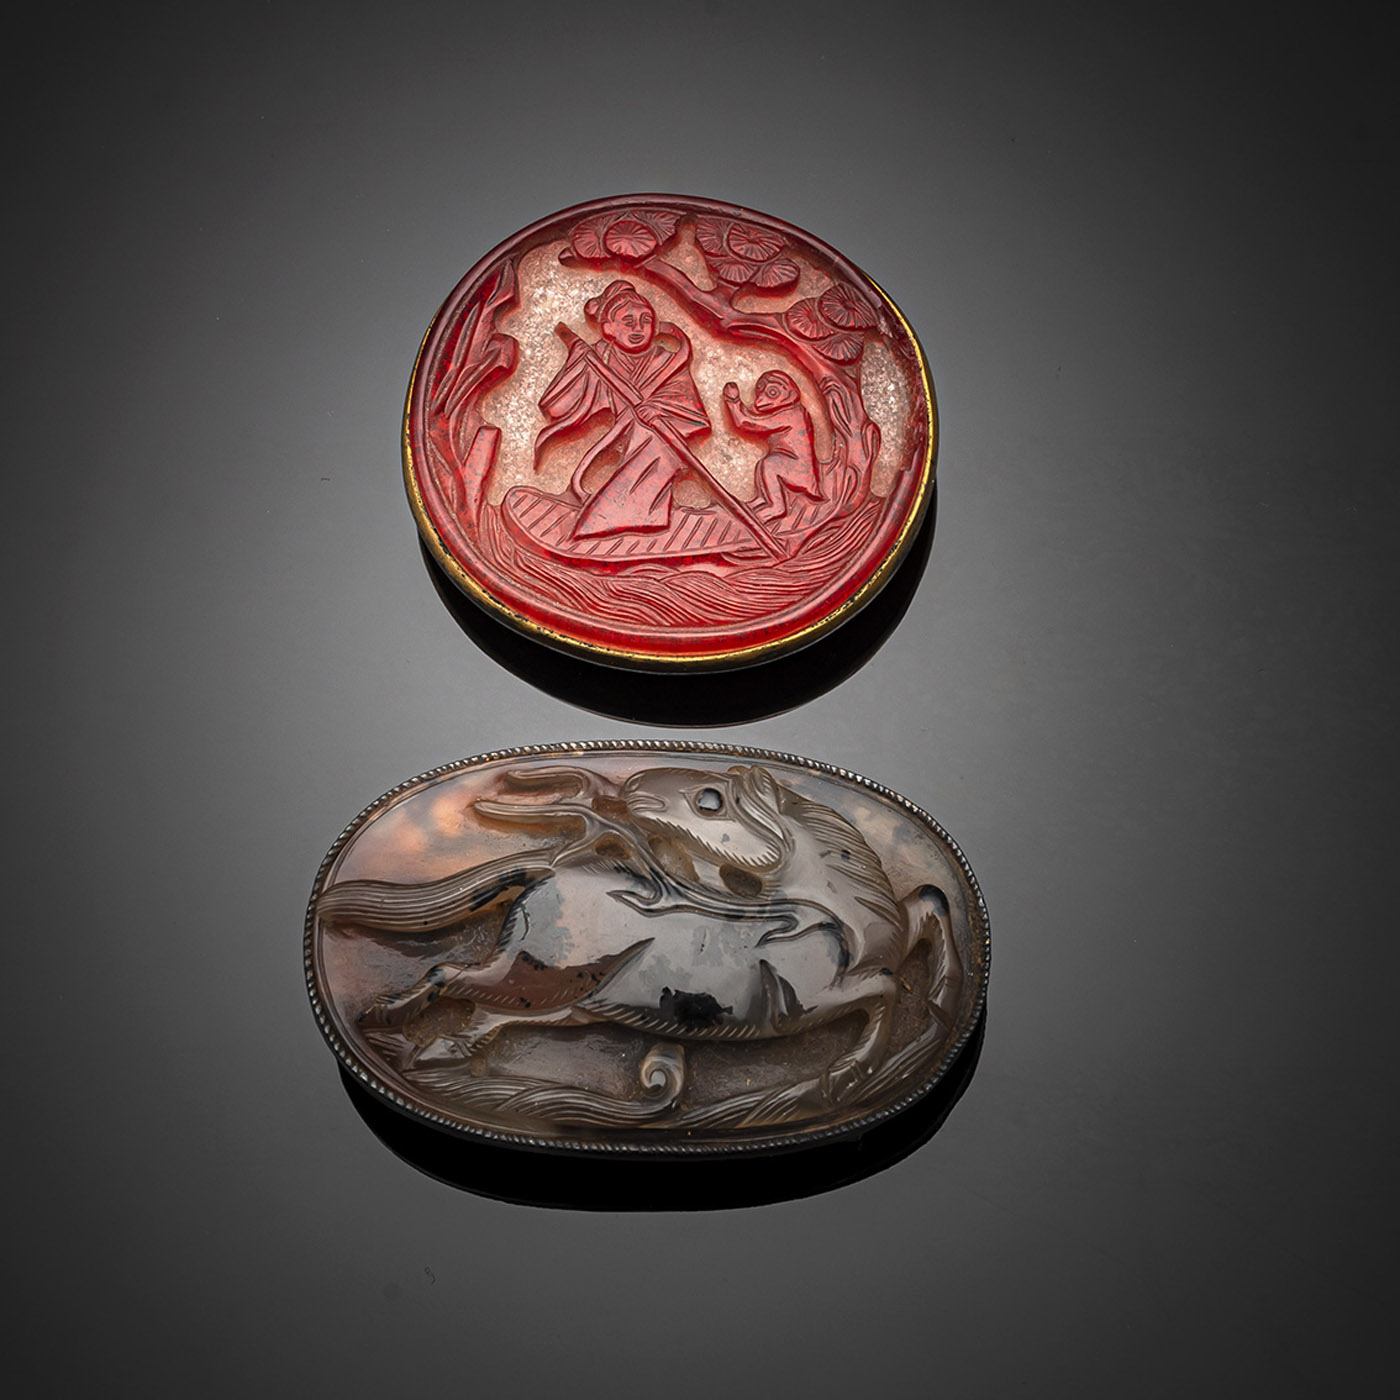 <b>TWO RARE BELT BUCKLES, ONE WITH A RARE BEIJING GLASS INLAY AND THE SECOND WITH A CARVED HORSE AGATE PANEL</b>